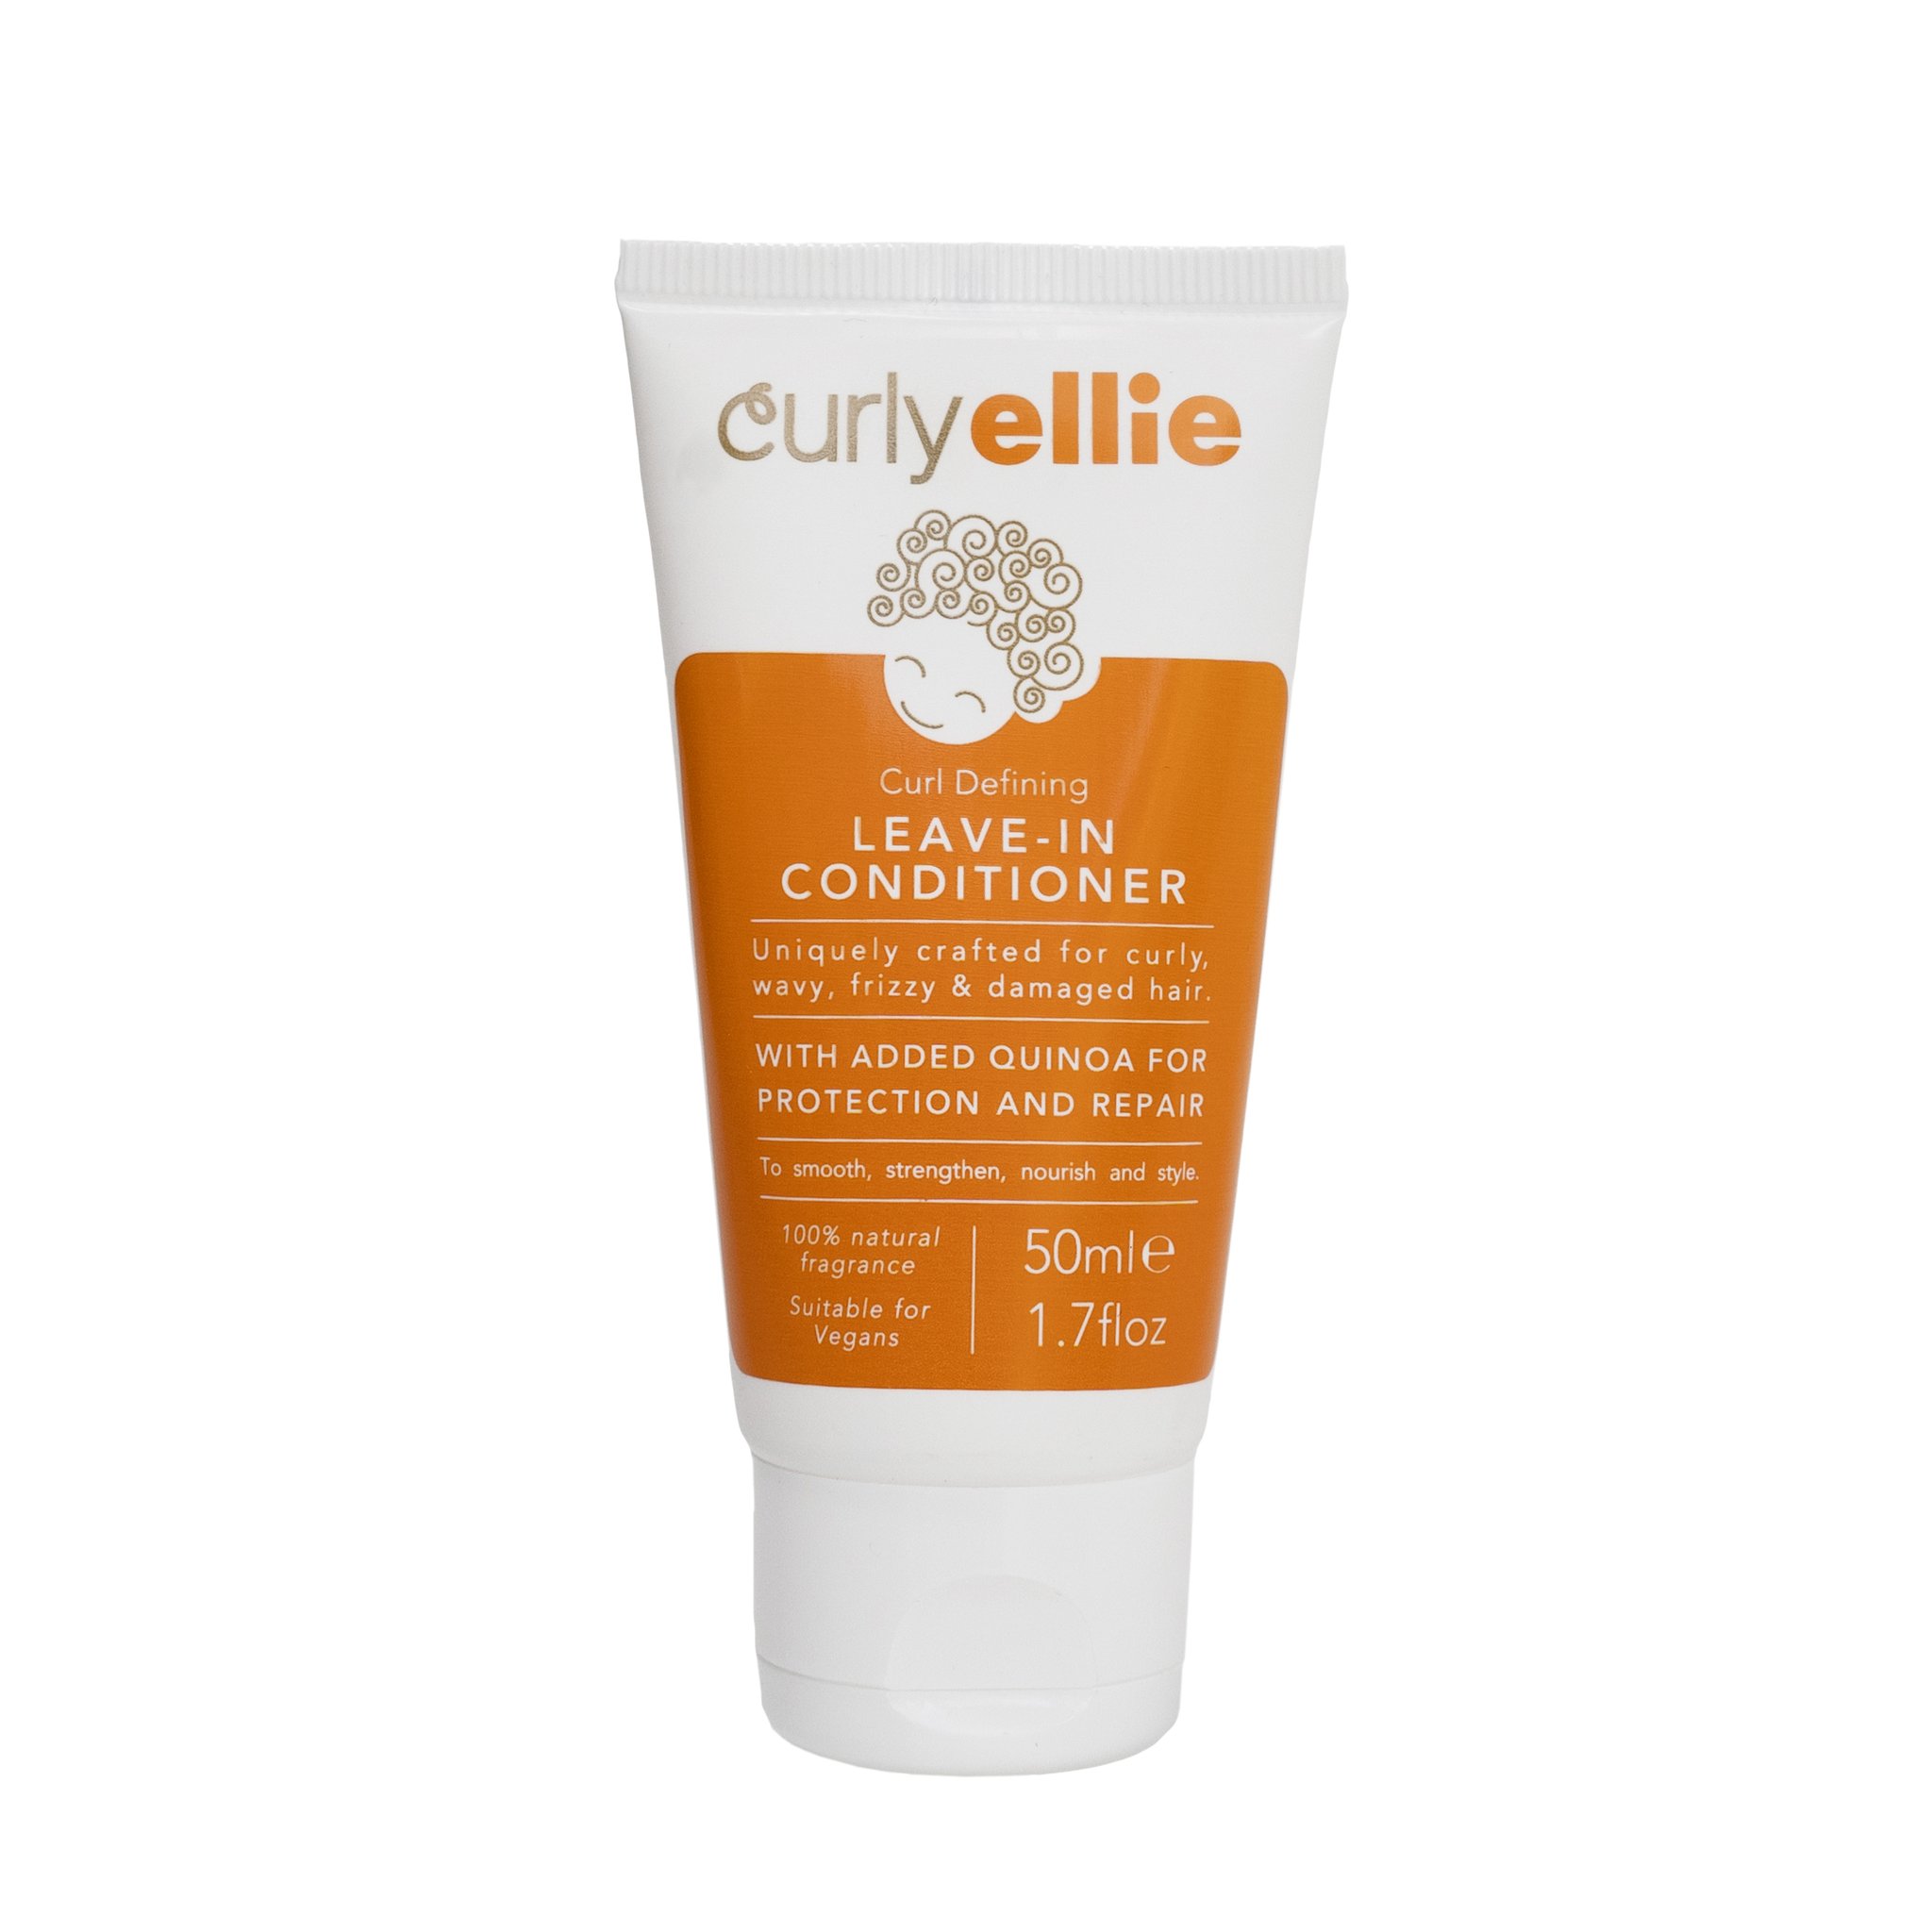 Curly Ellie Leave-in Conditioner, Travel Size 